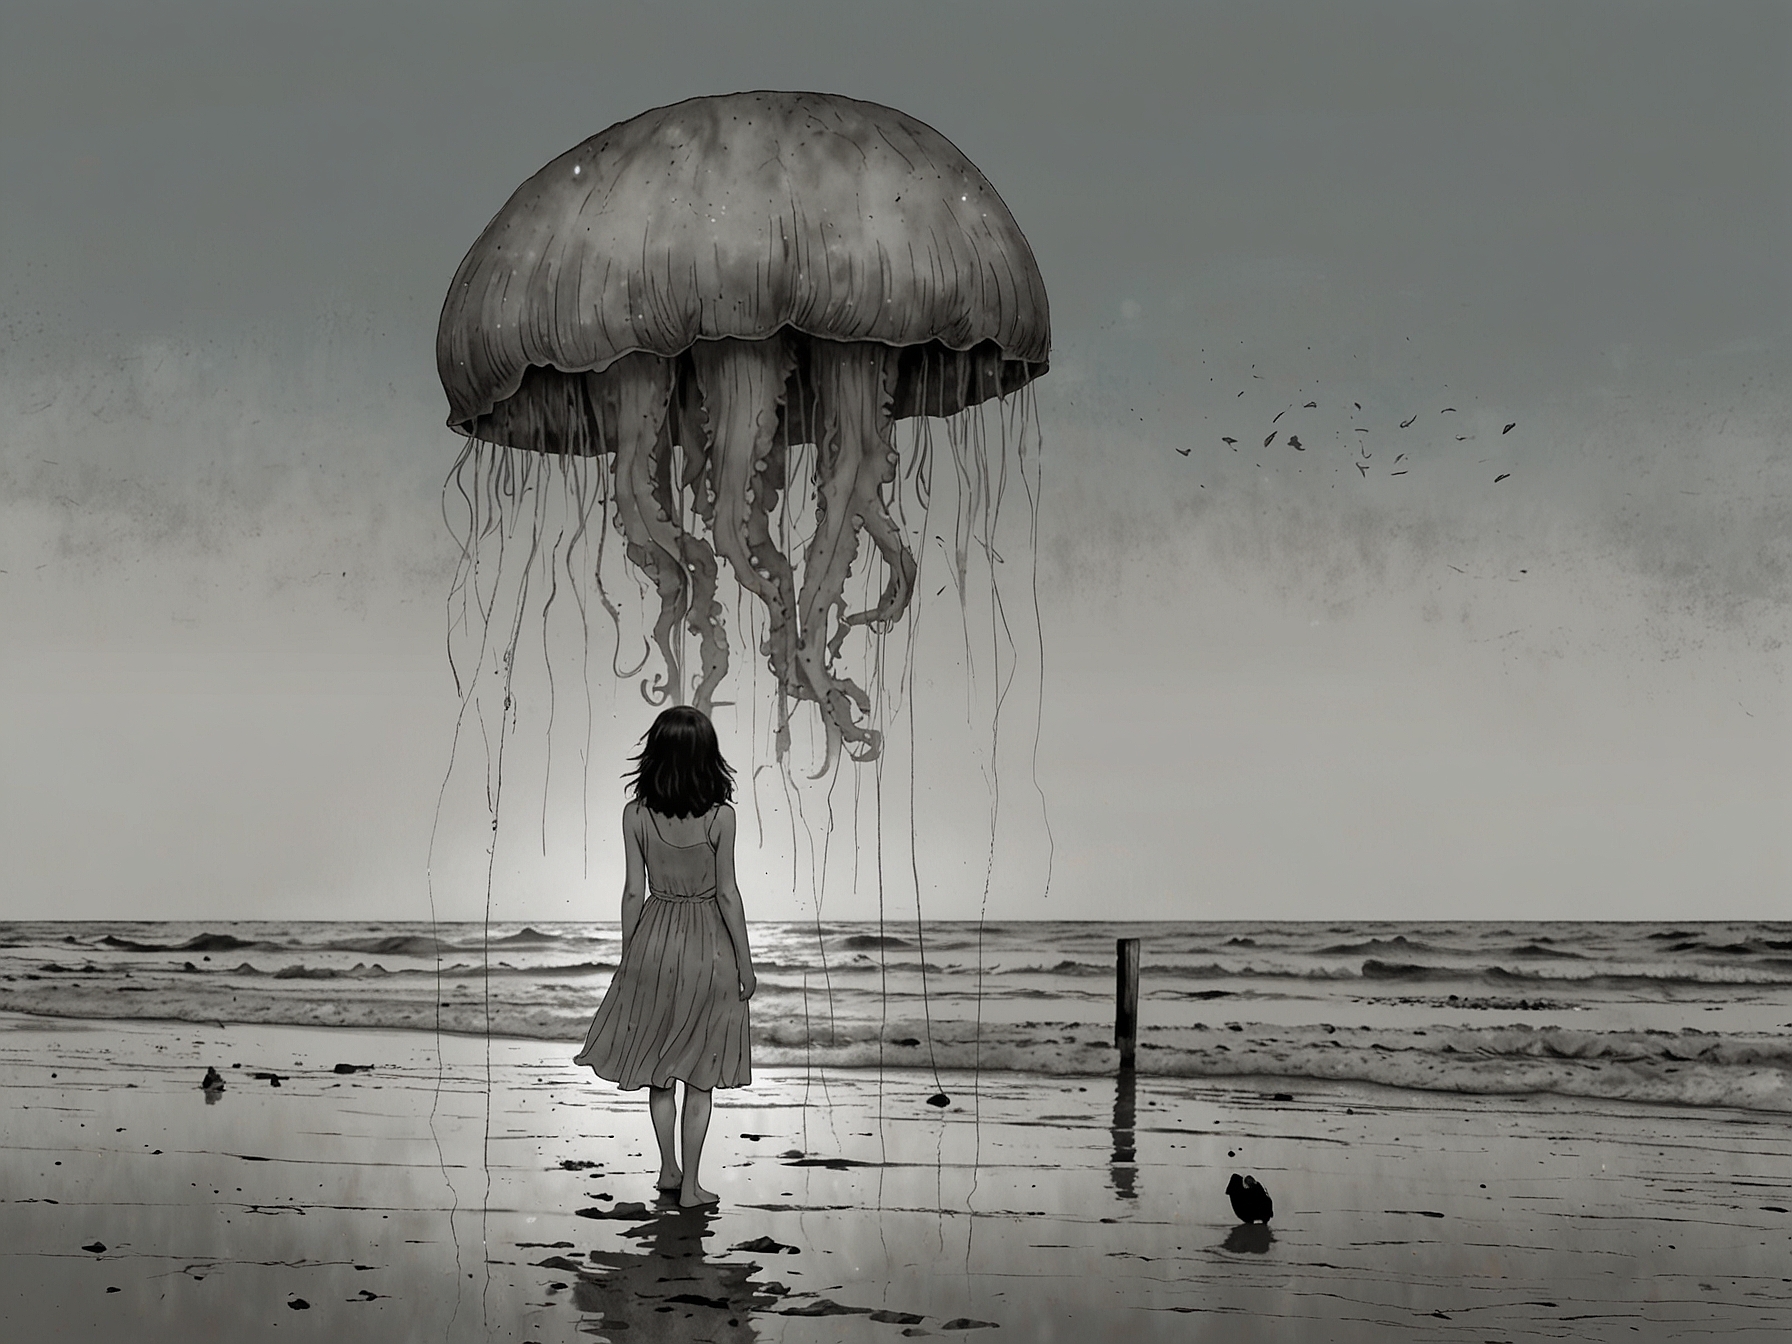 Lily Allen, visibly distressed, stands on a beach with jellyfish nearby, hinting at her traumatic childhood experience with the creatures.